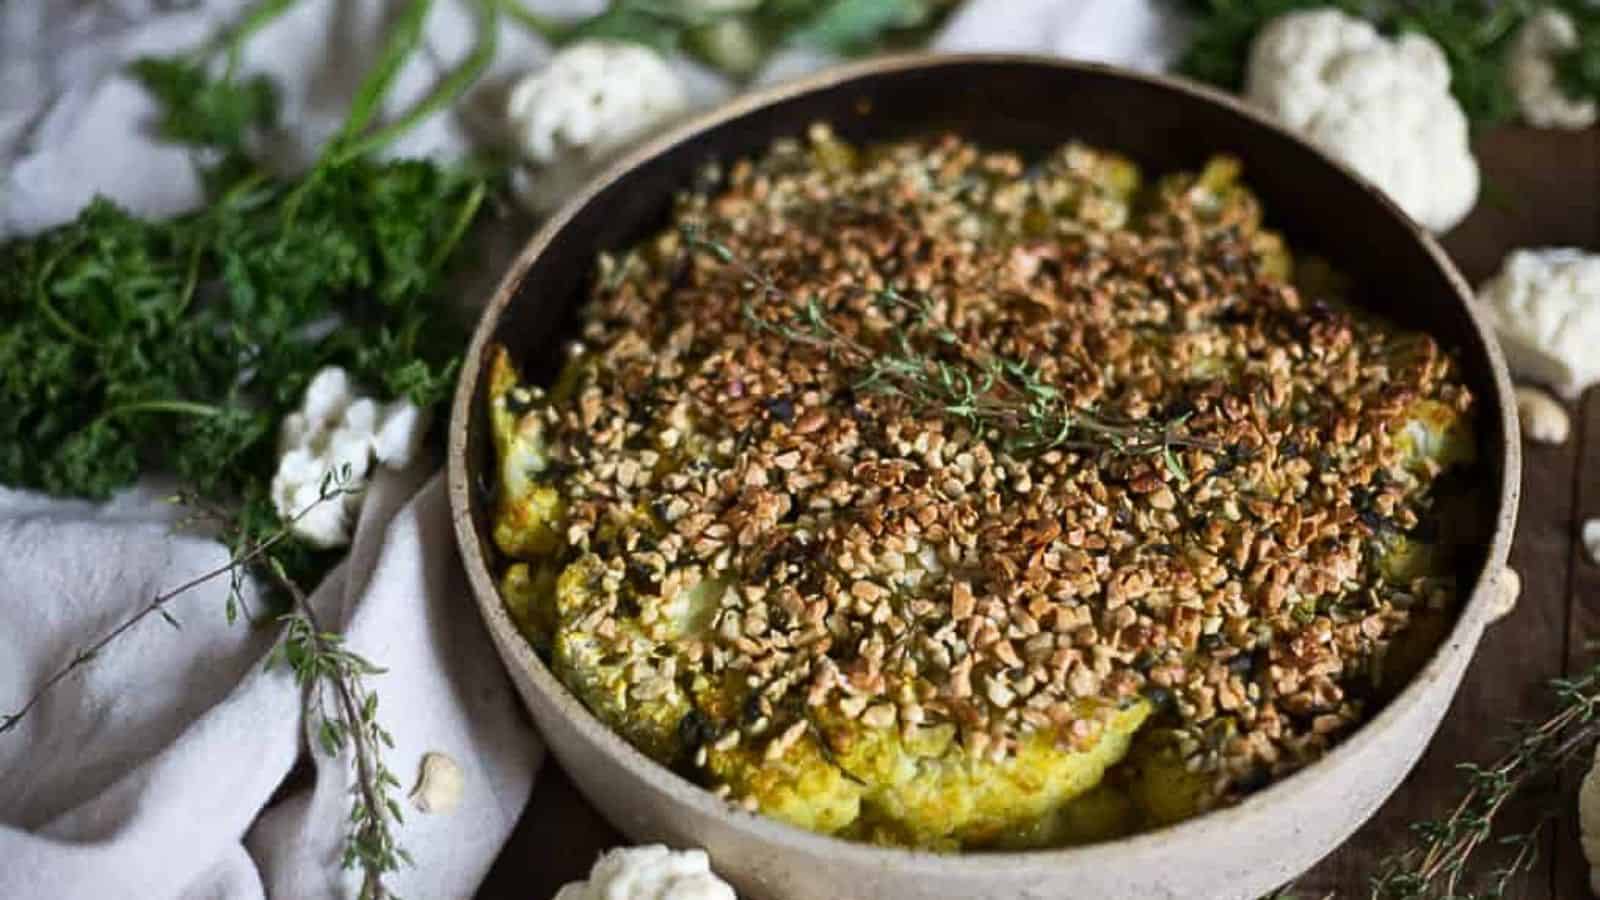 A bowl of cauliflower gratin topped with nuts and herbs.